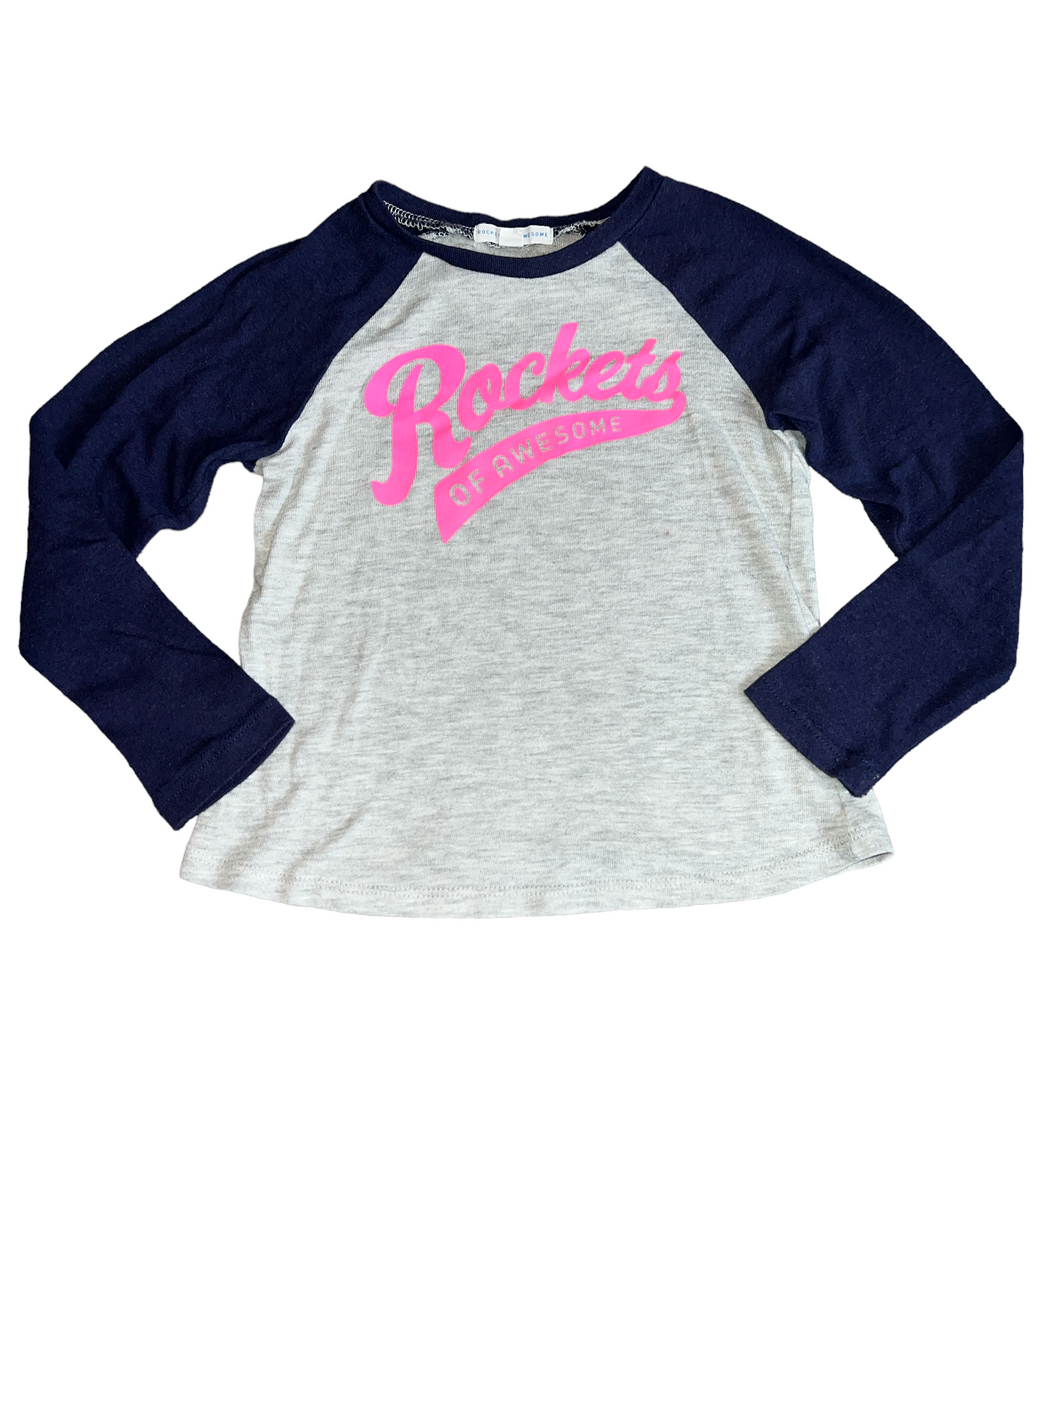 Rockets of Awesome girls knit baseball tee top 4-5